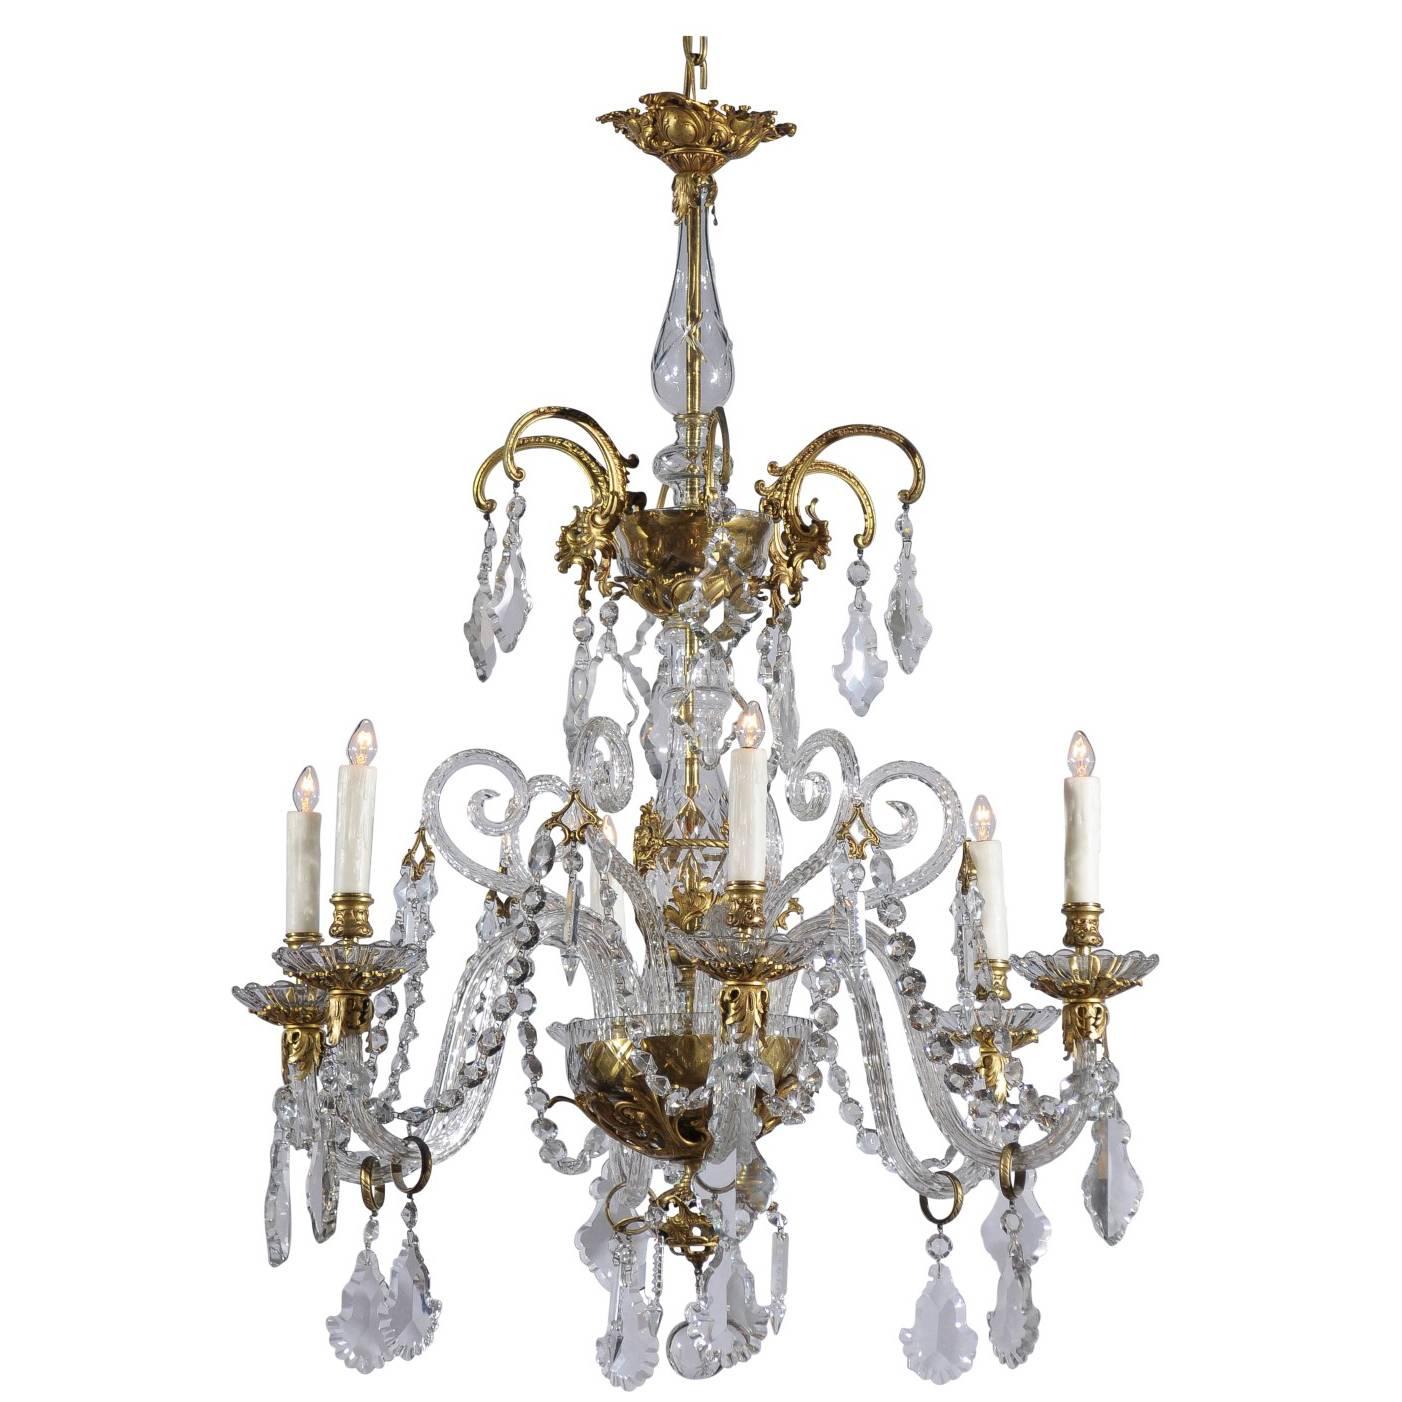 French Rococo Style Six-Light Crystal Chandelier with Gilt Bronze Accents  For Sale